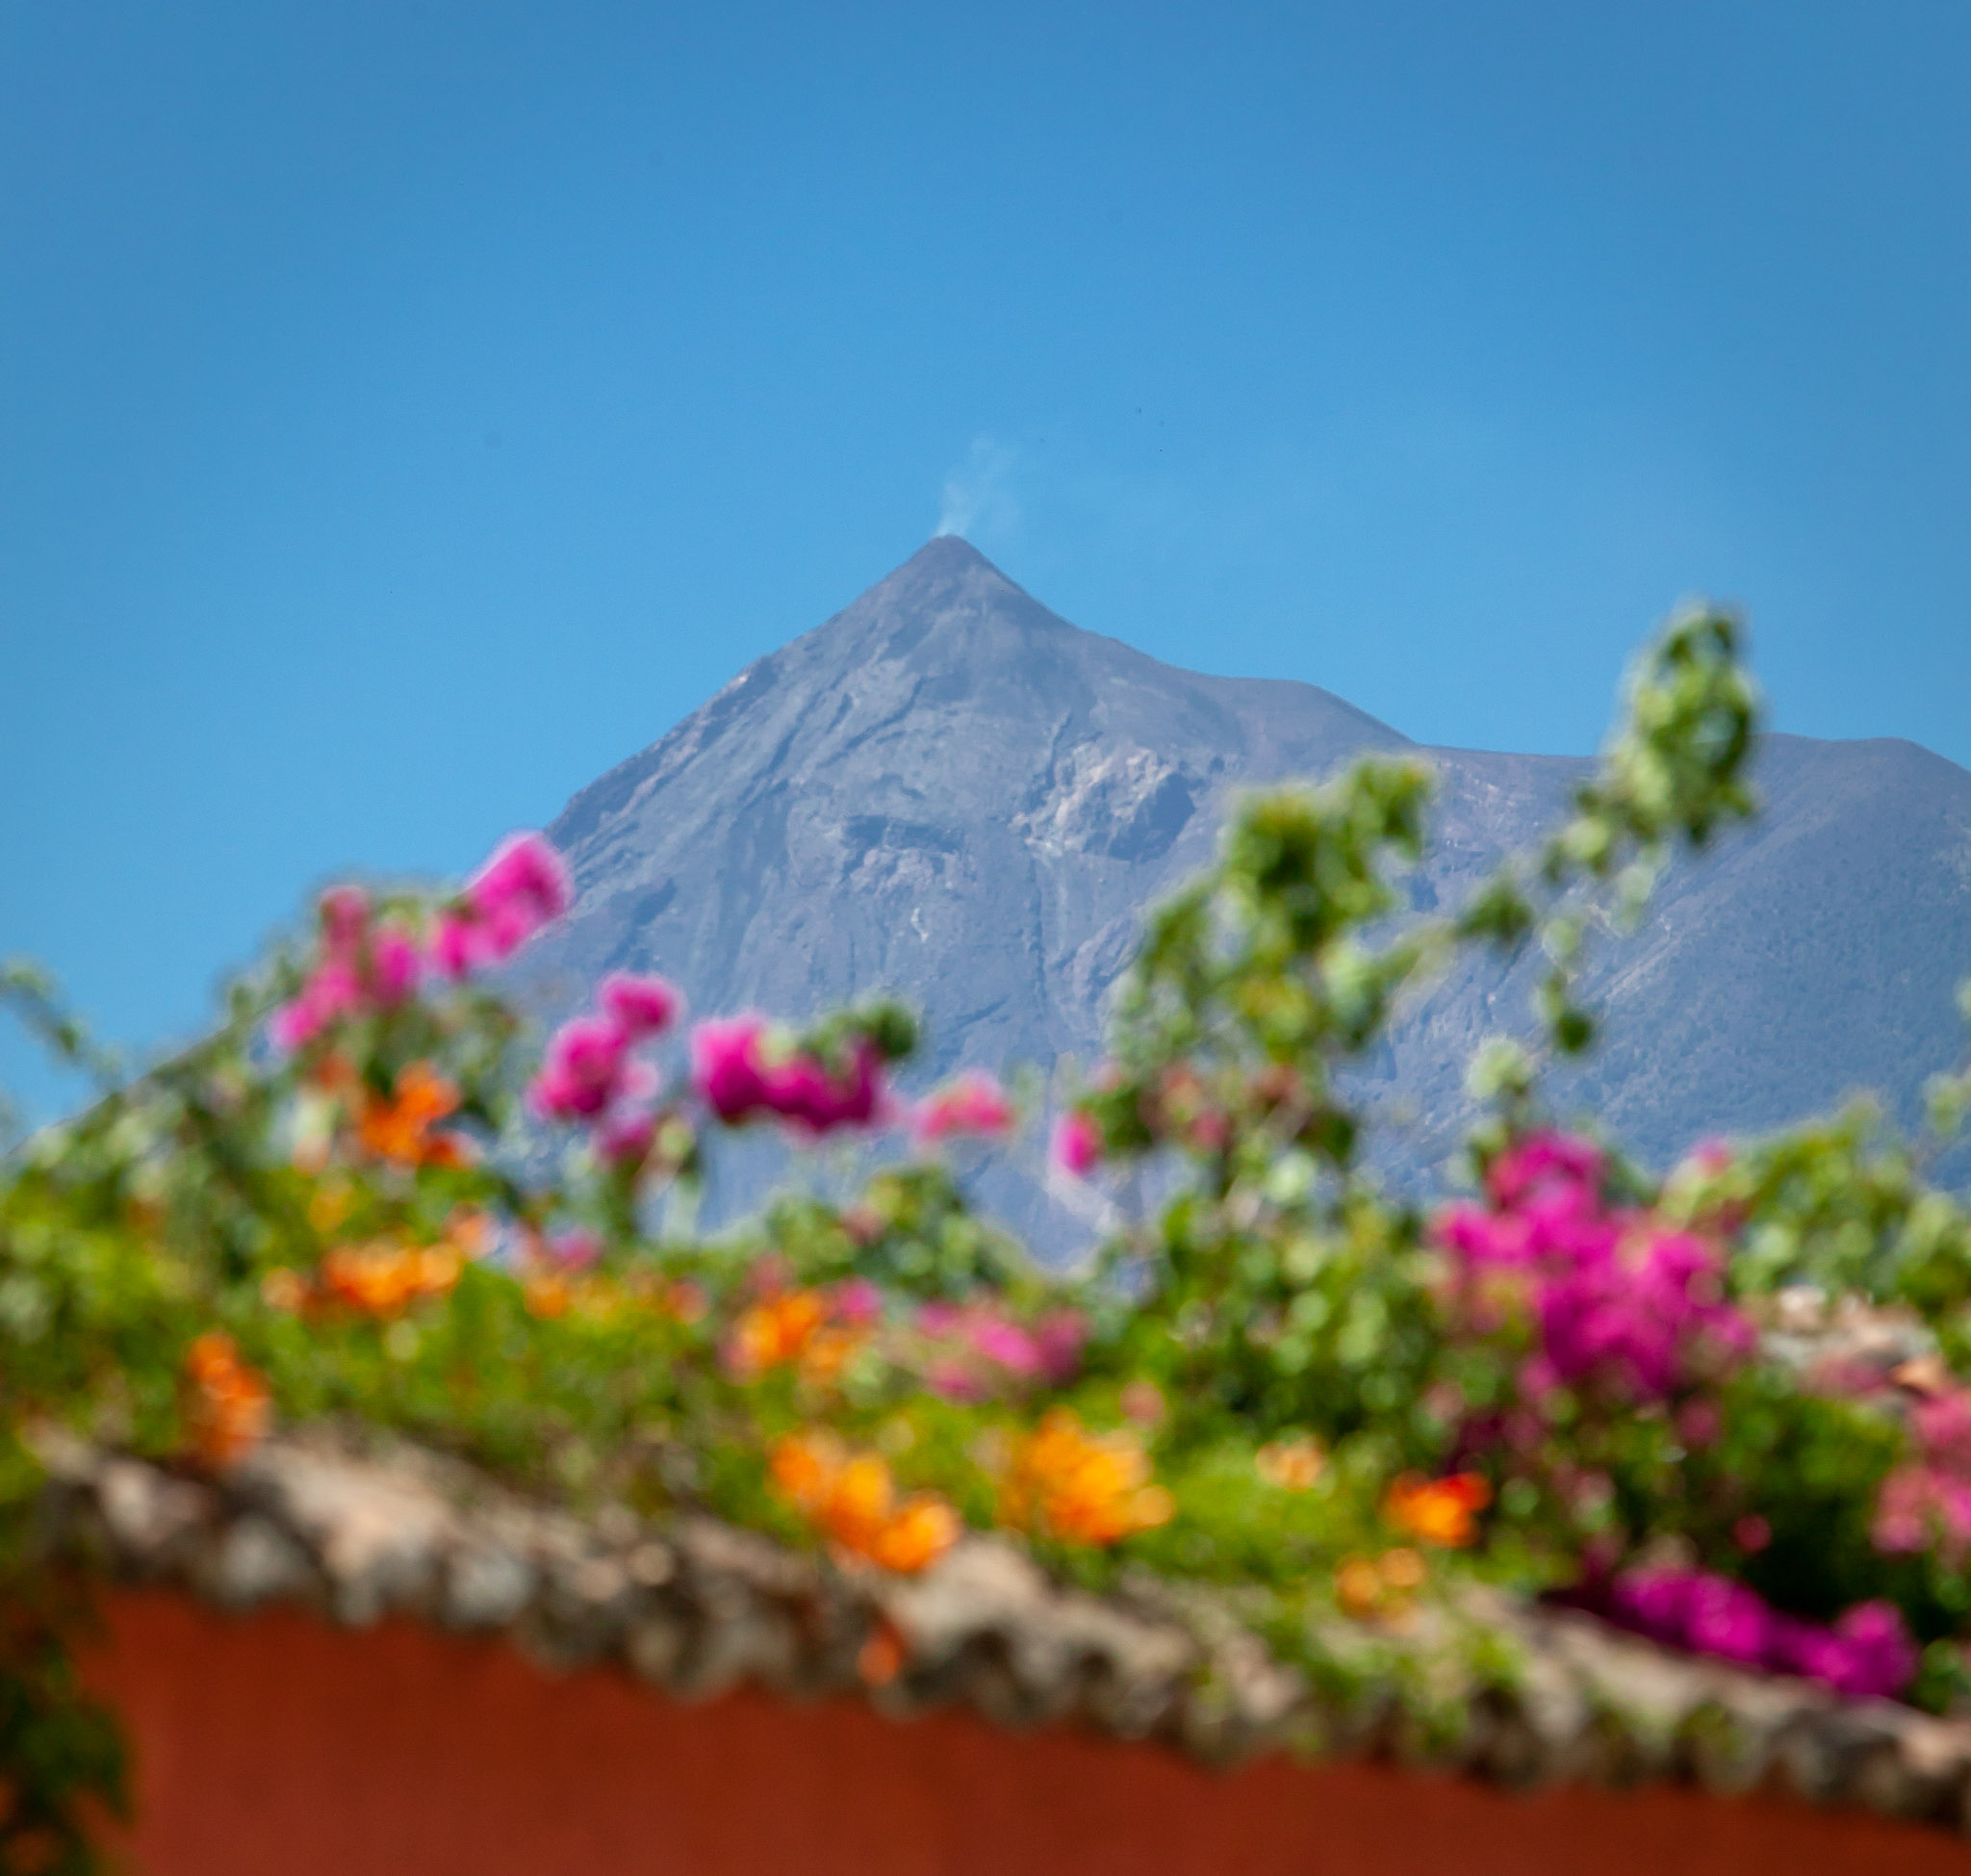 Volcán Fuego puffing over flowers